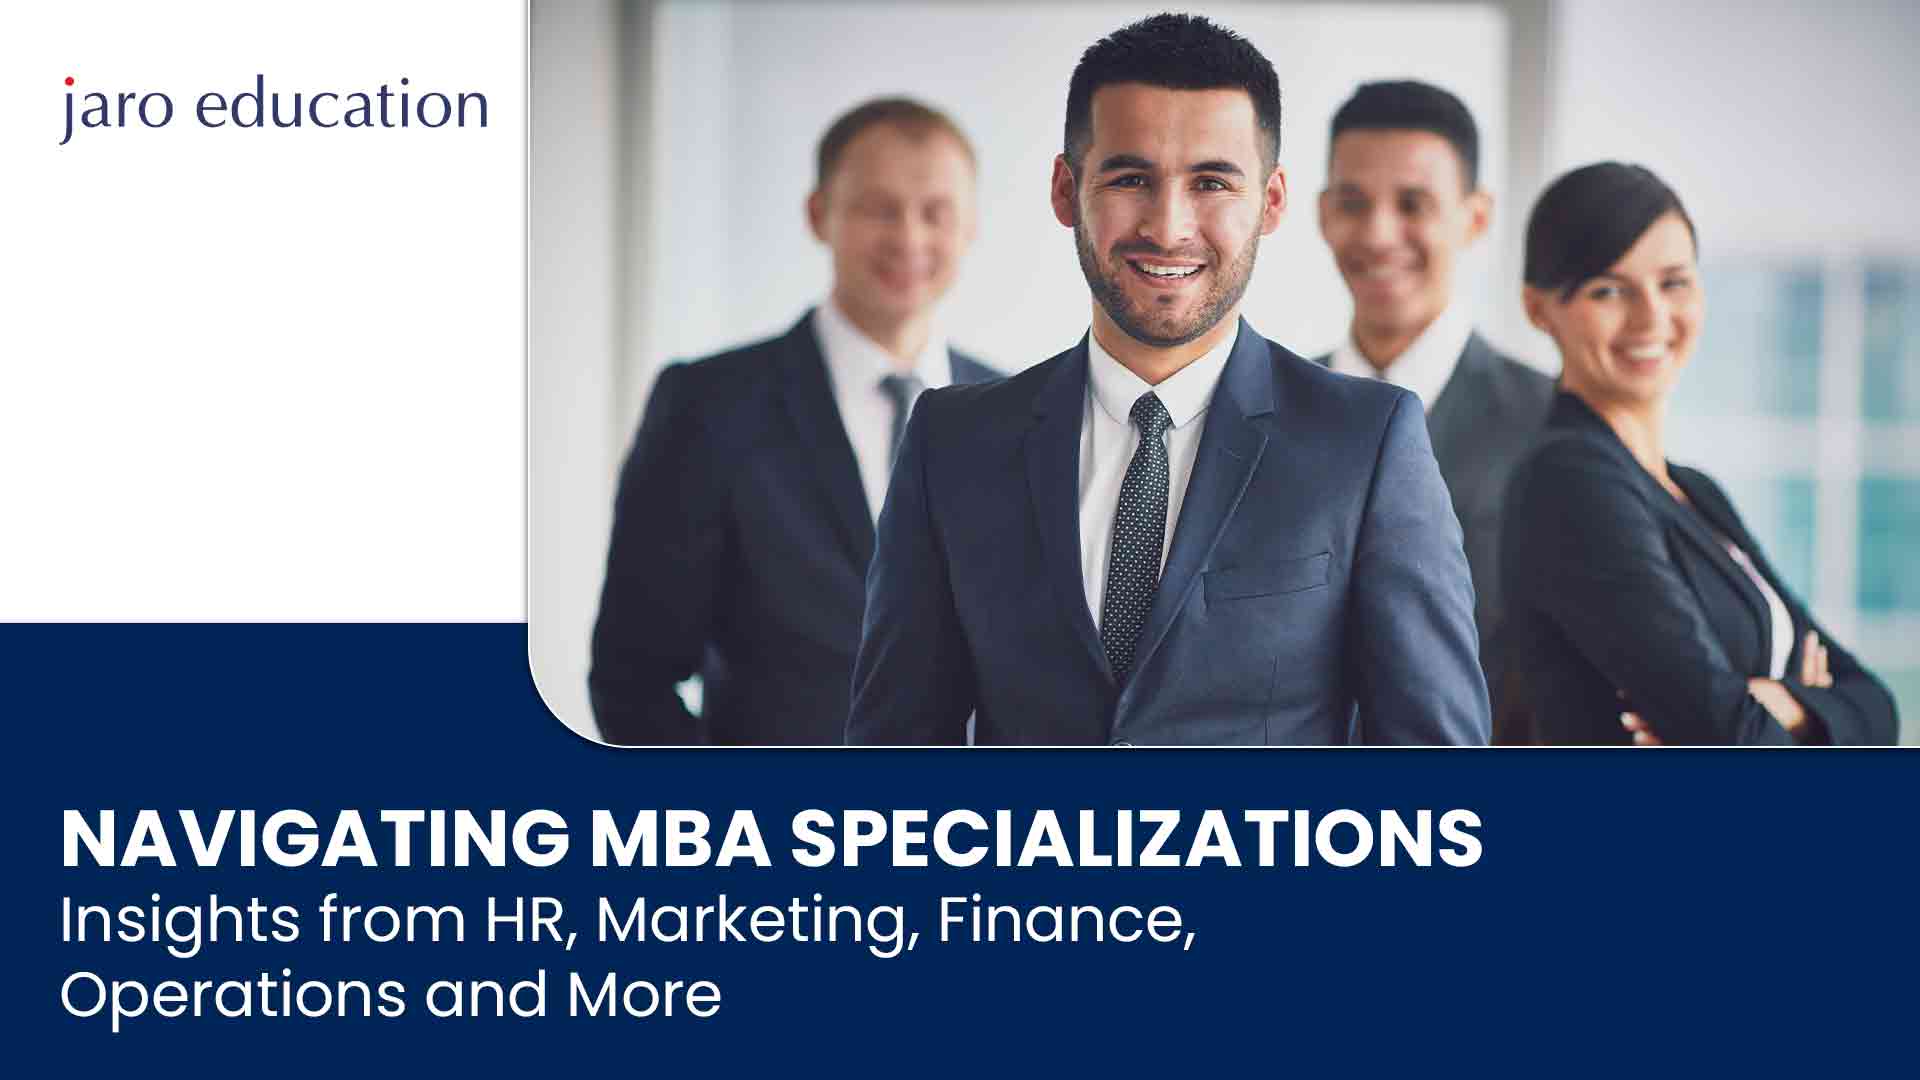 Navigating MBA Specializations Insights from HR, Marketing, Finance, Operations and More